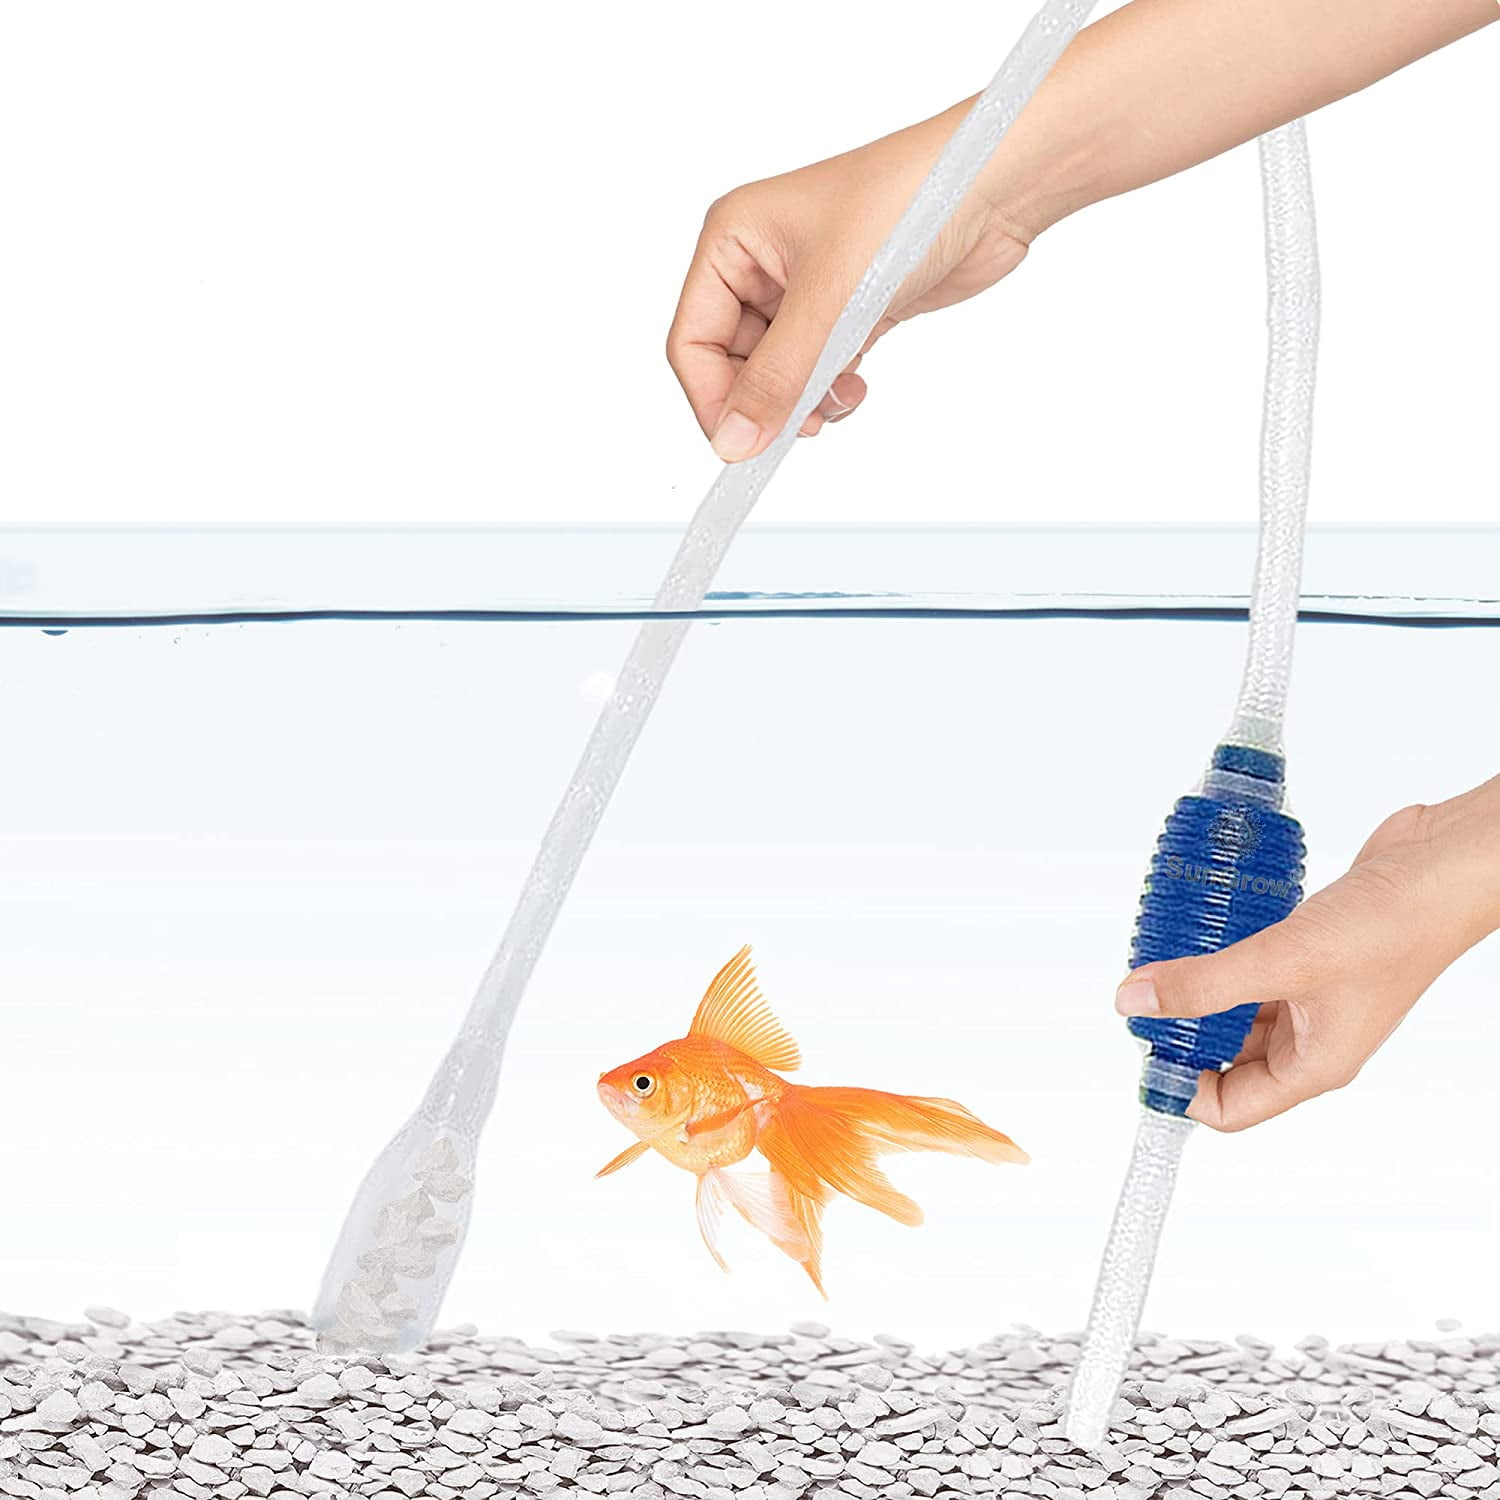 SaversMart Aquarium/Fish Tank Siphon and Gravel Cleaner,A Hand Syphon Pump  for Fish Tank Water Change in Minutes